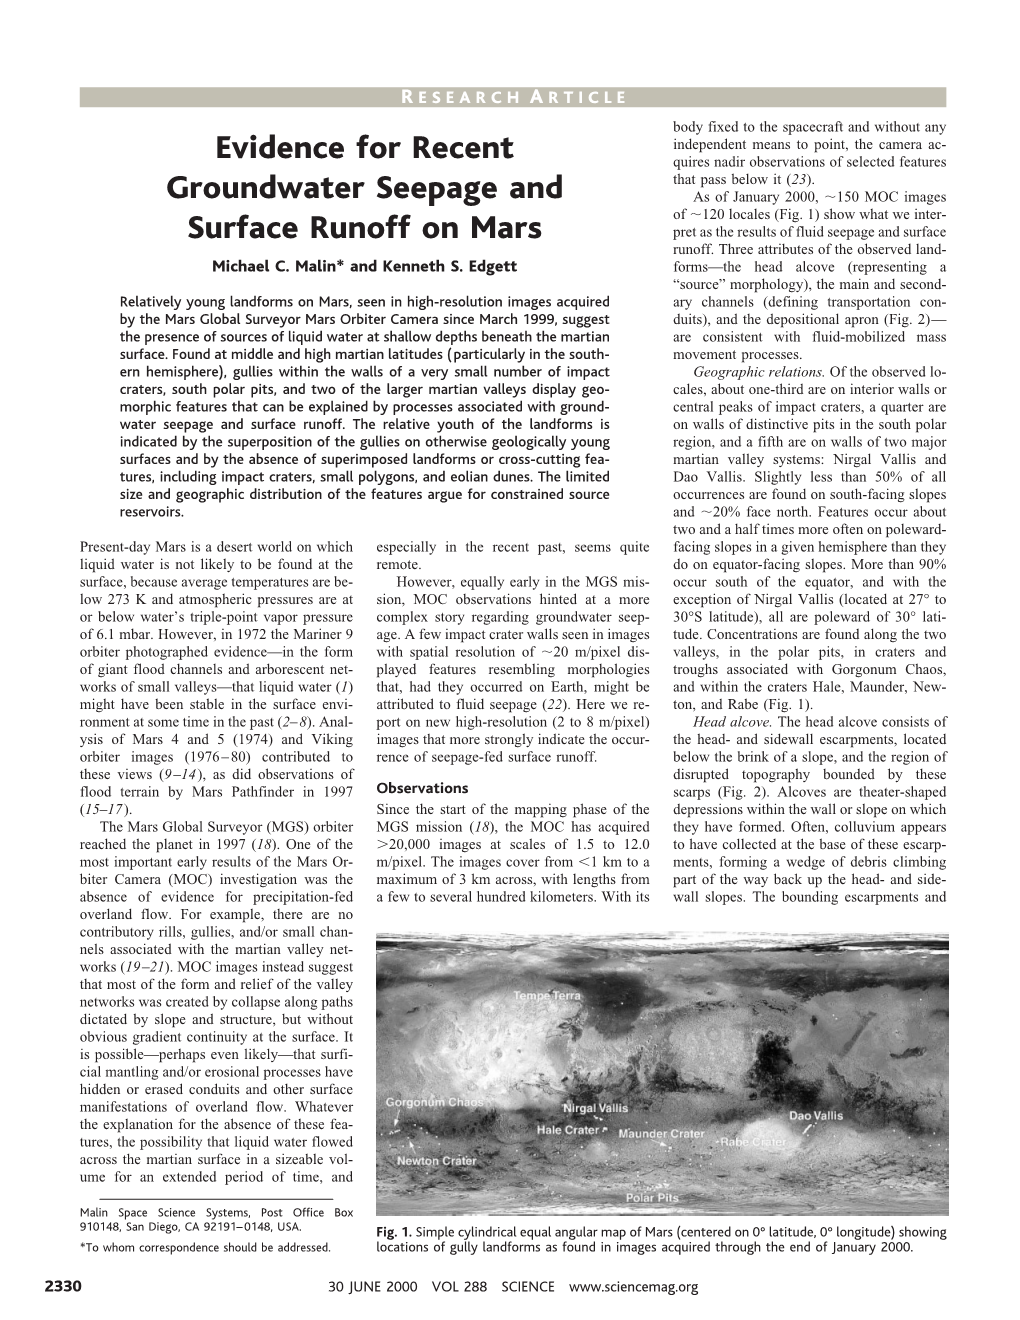 Evidence for Recent Groundwater Seepage and Surface Runoff on Mars